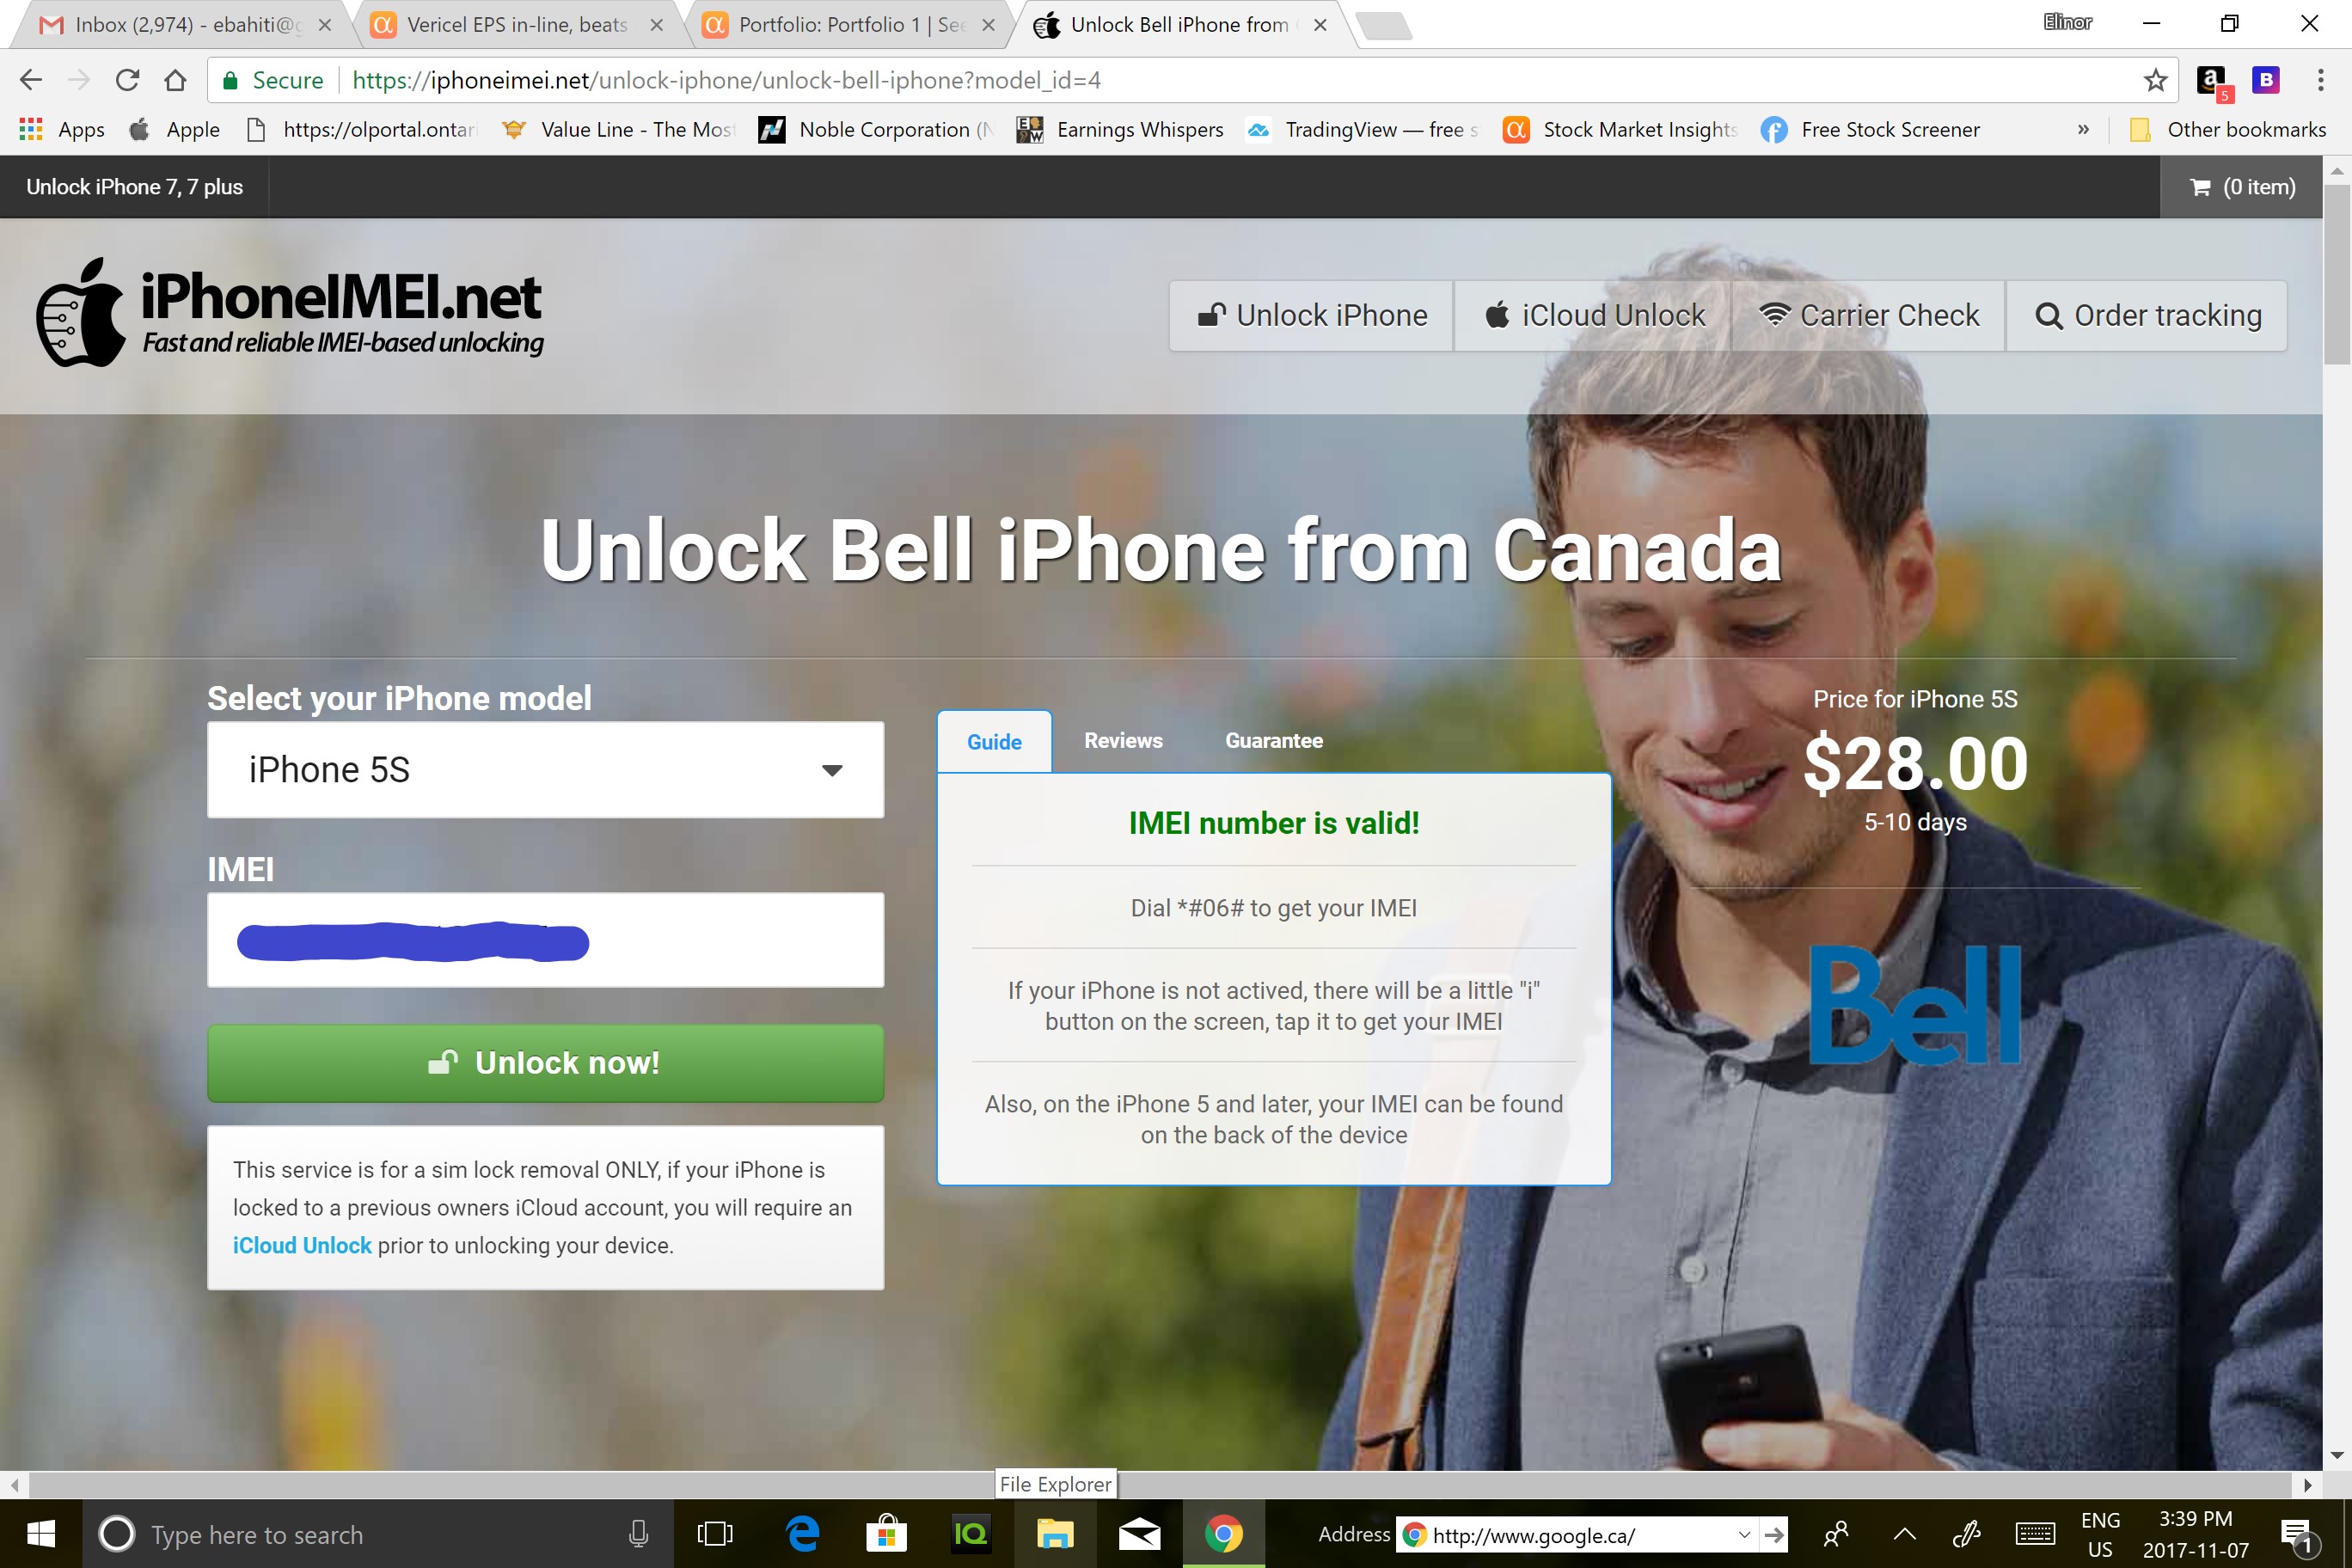 Price asked initially after entering imei number